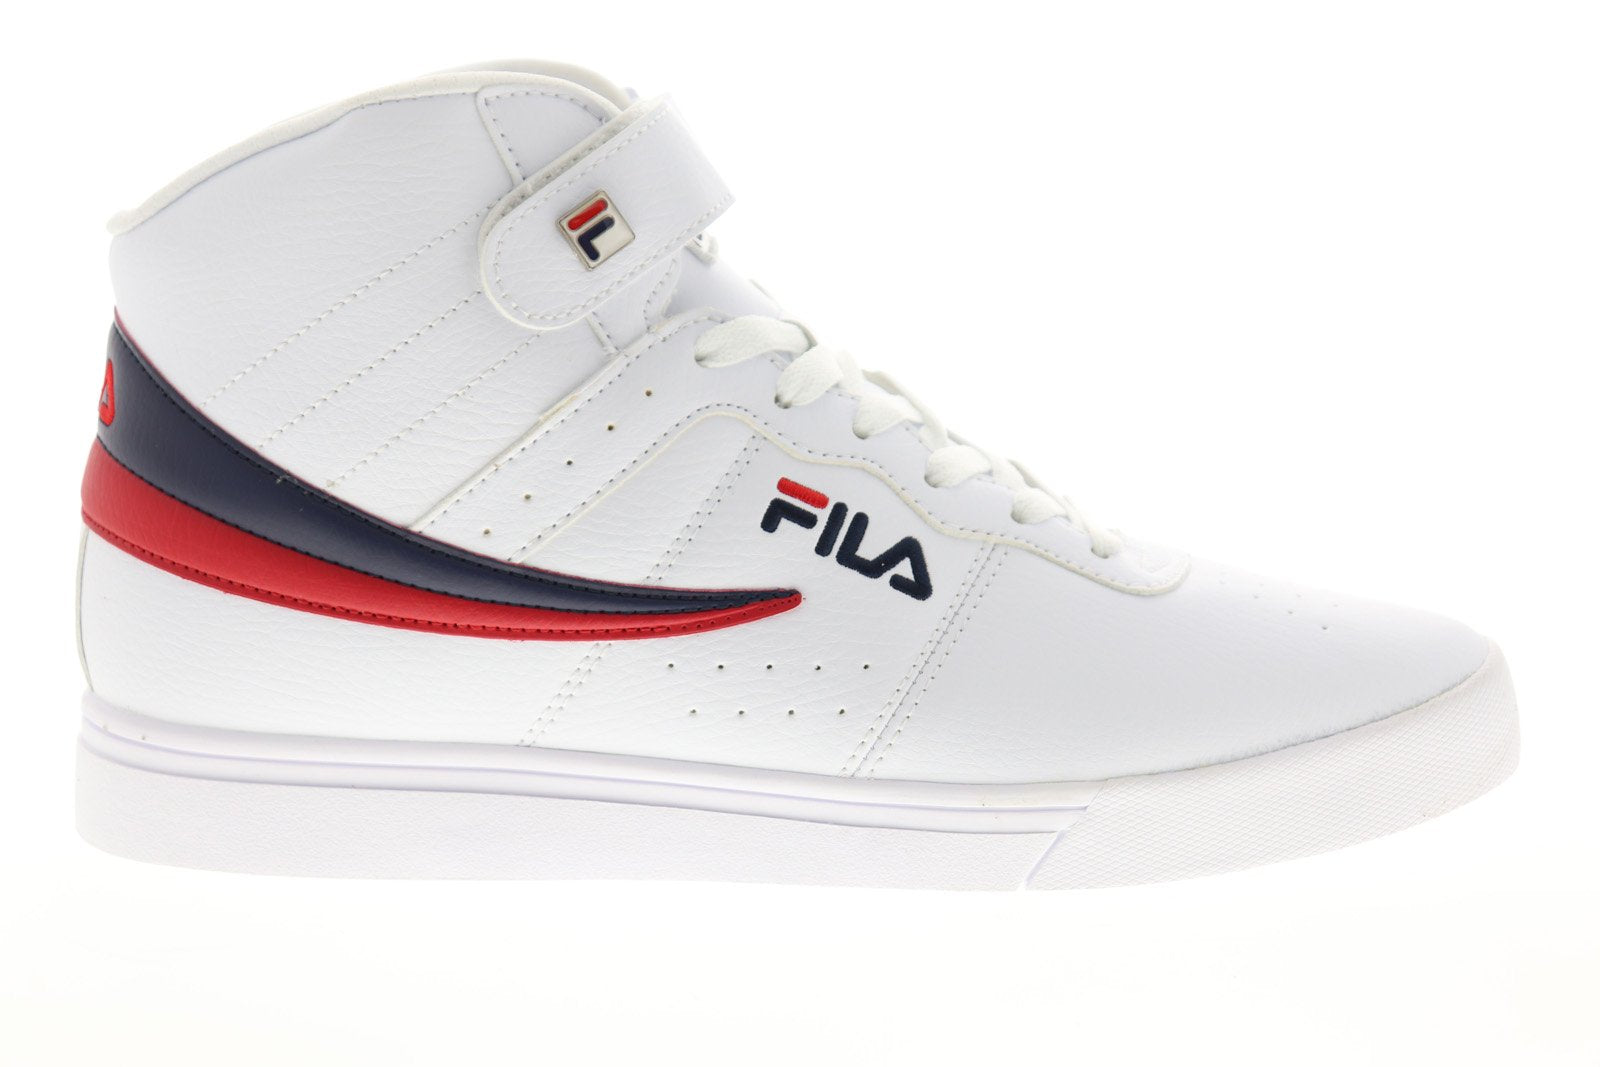 Fila Vulc 13 1SC60526-150 Mens White Lace Up Lifestyle Sneakers Shoes ...